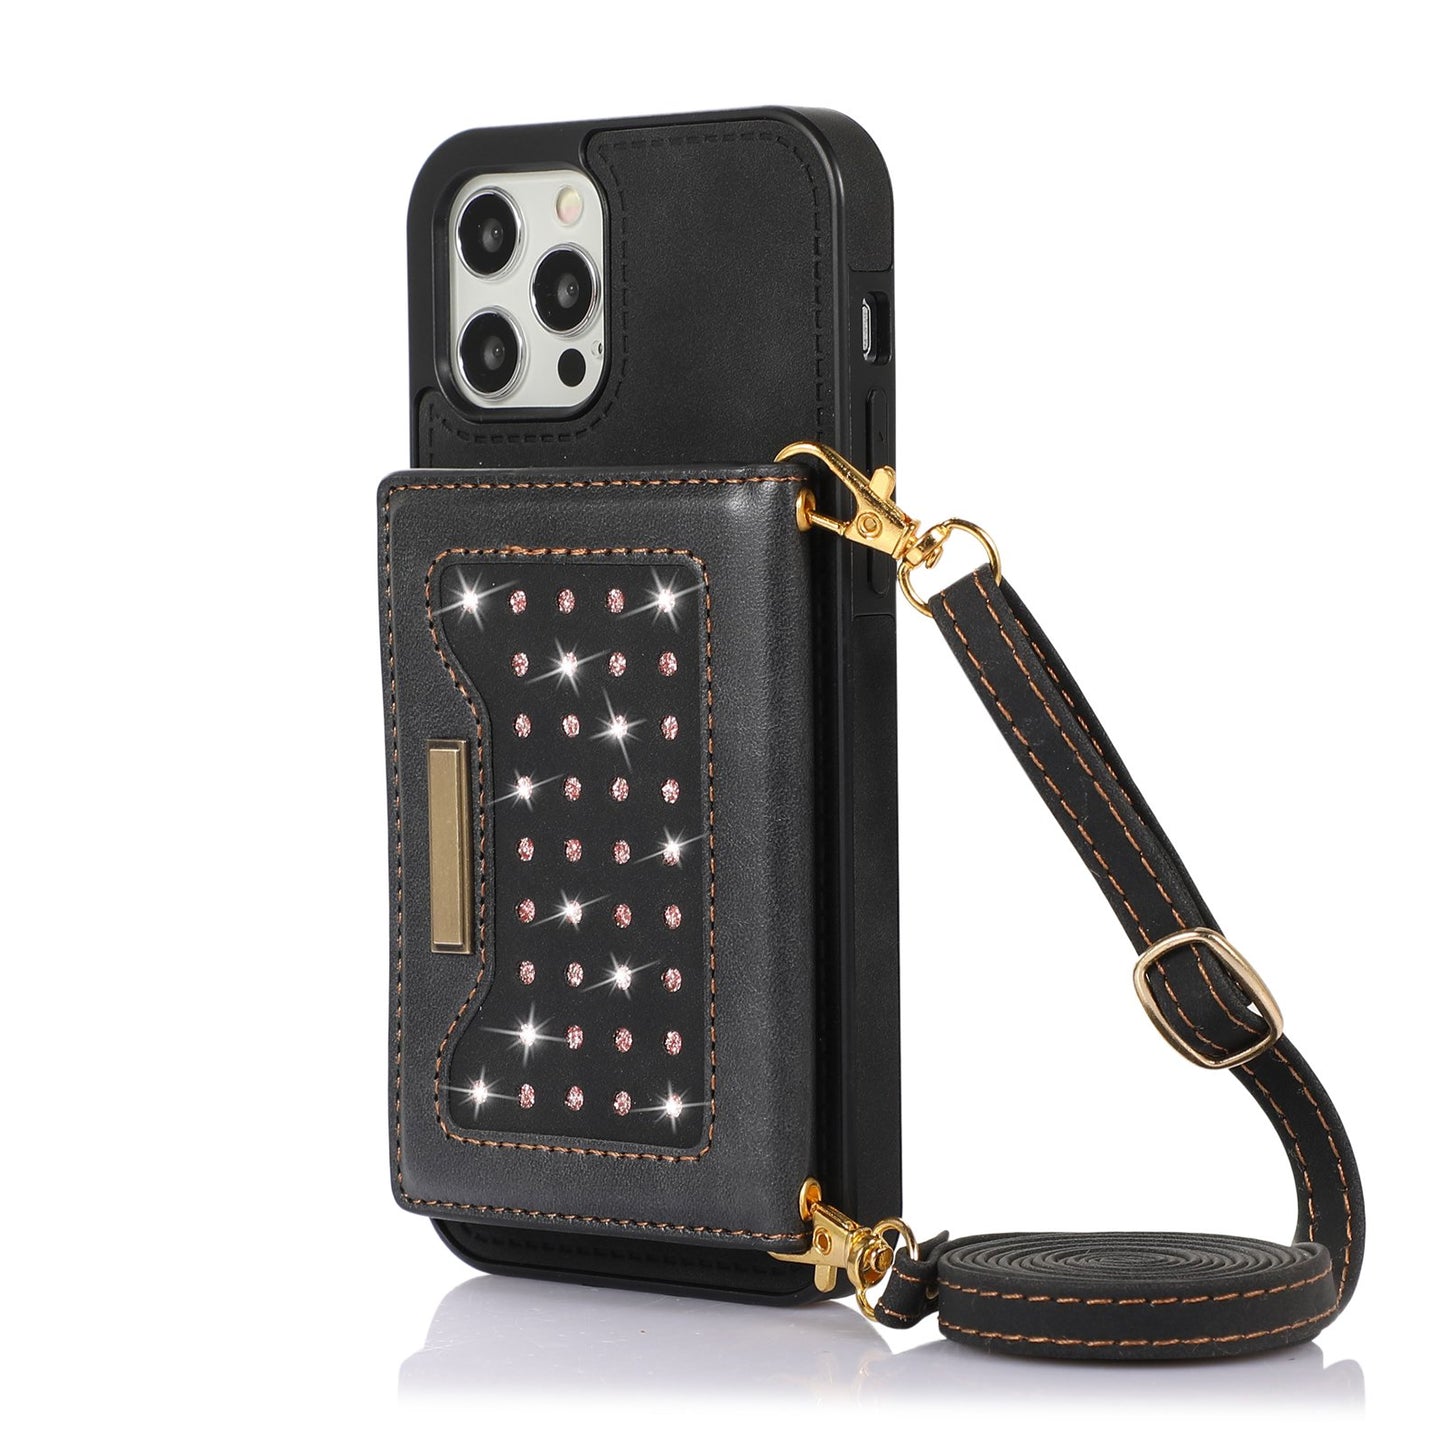 Stylish Leather Wallet Phone Case with Shoulder Strap for iPhone 11/12/13/14 - Pink Bling Design for Women on the Go